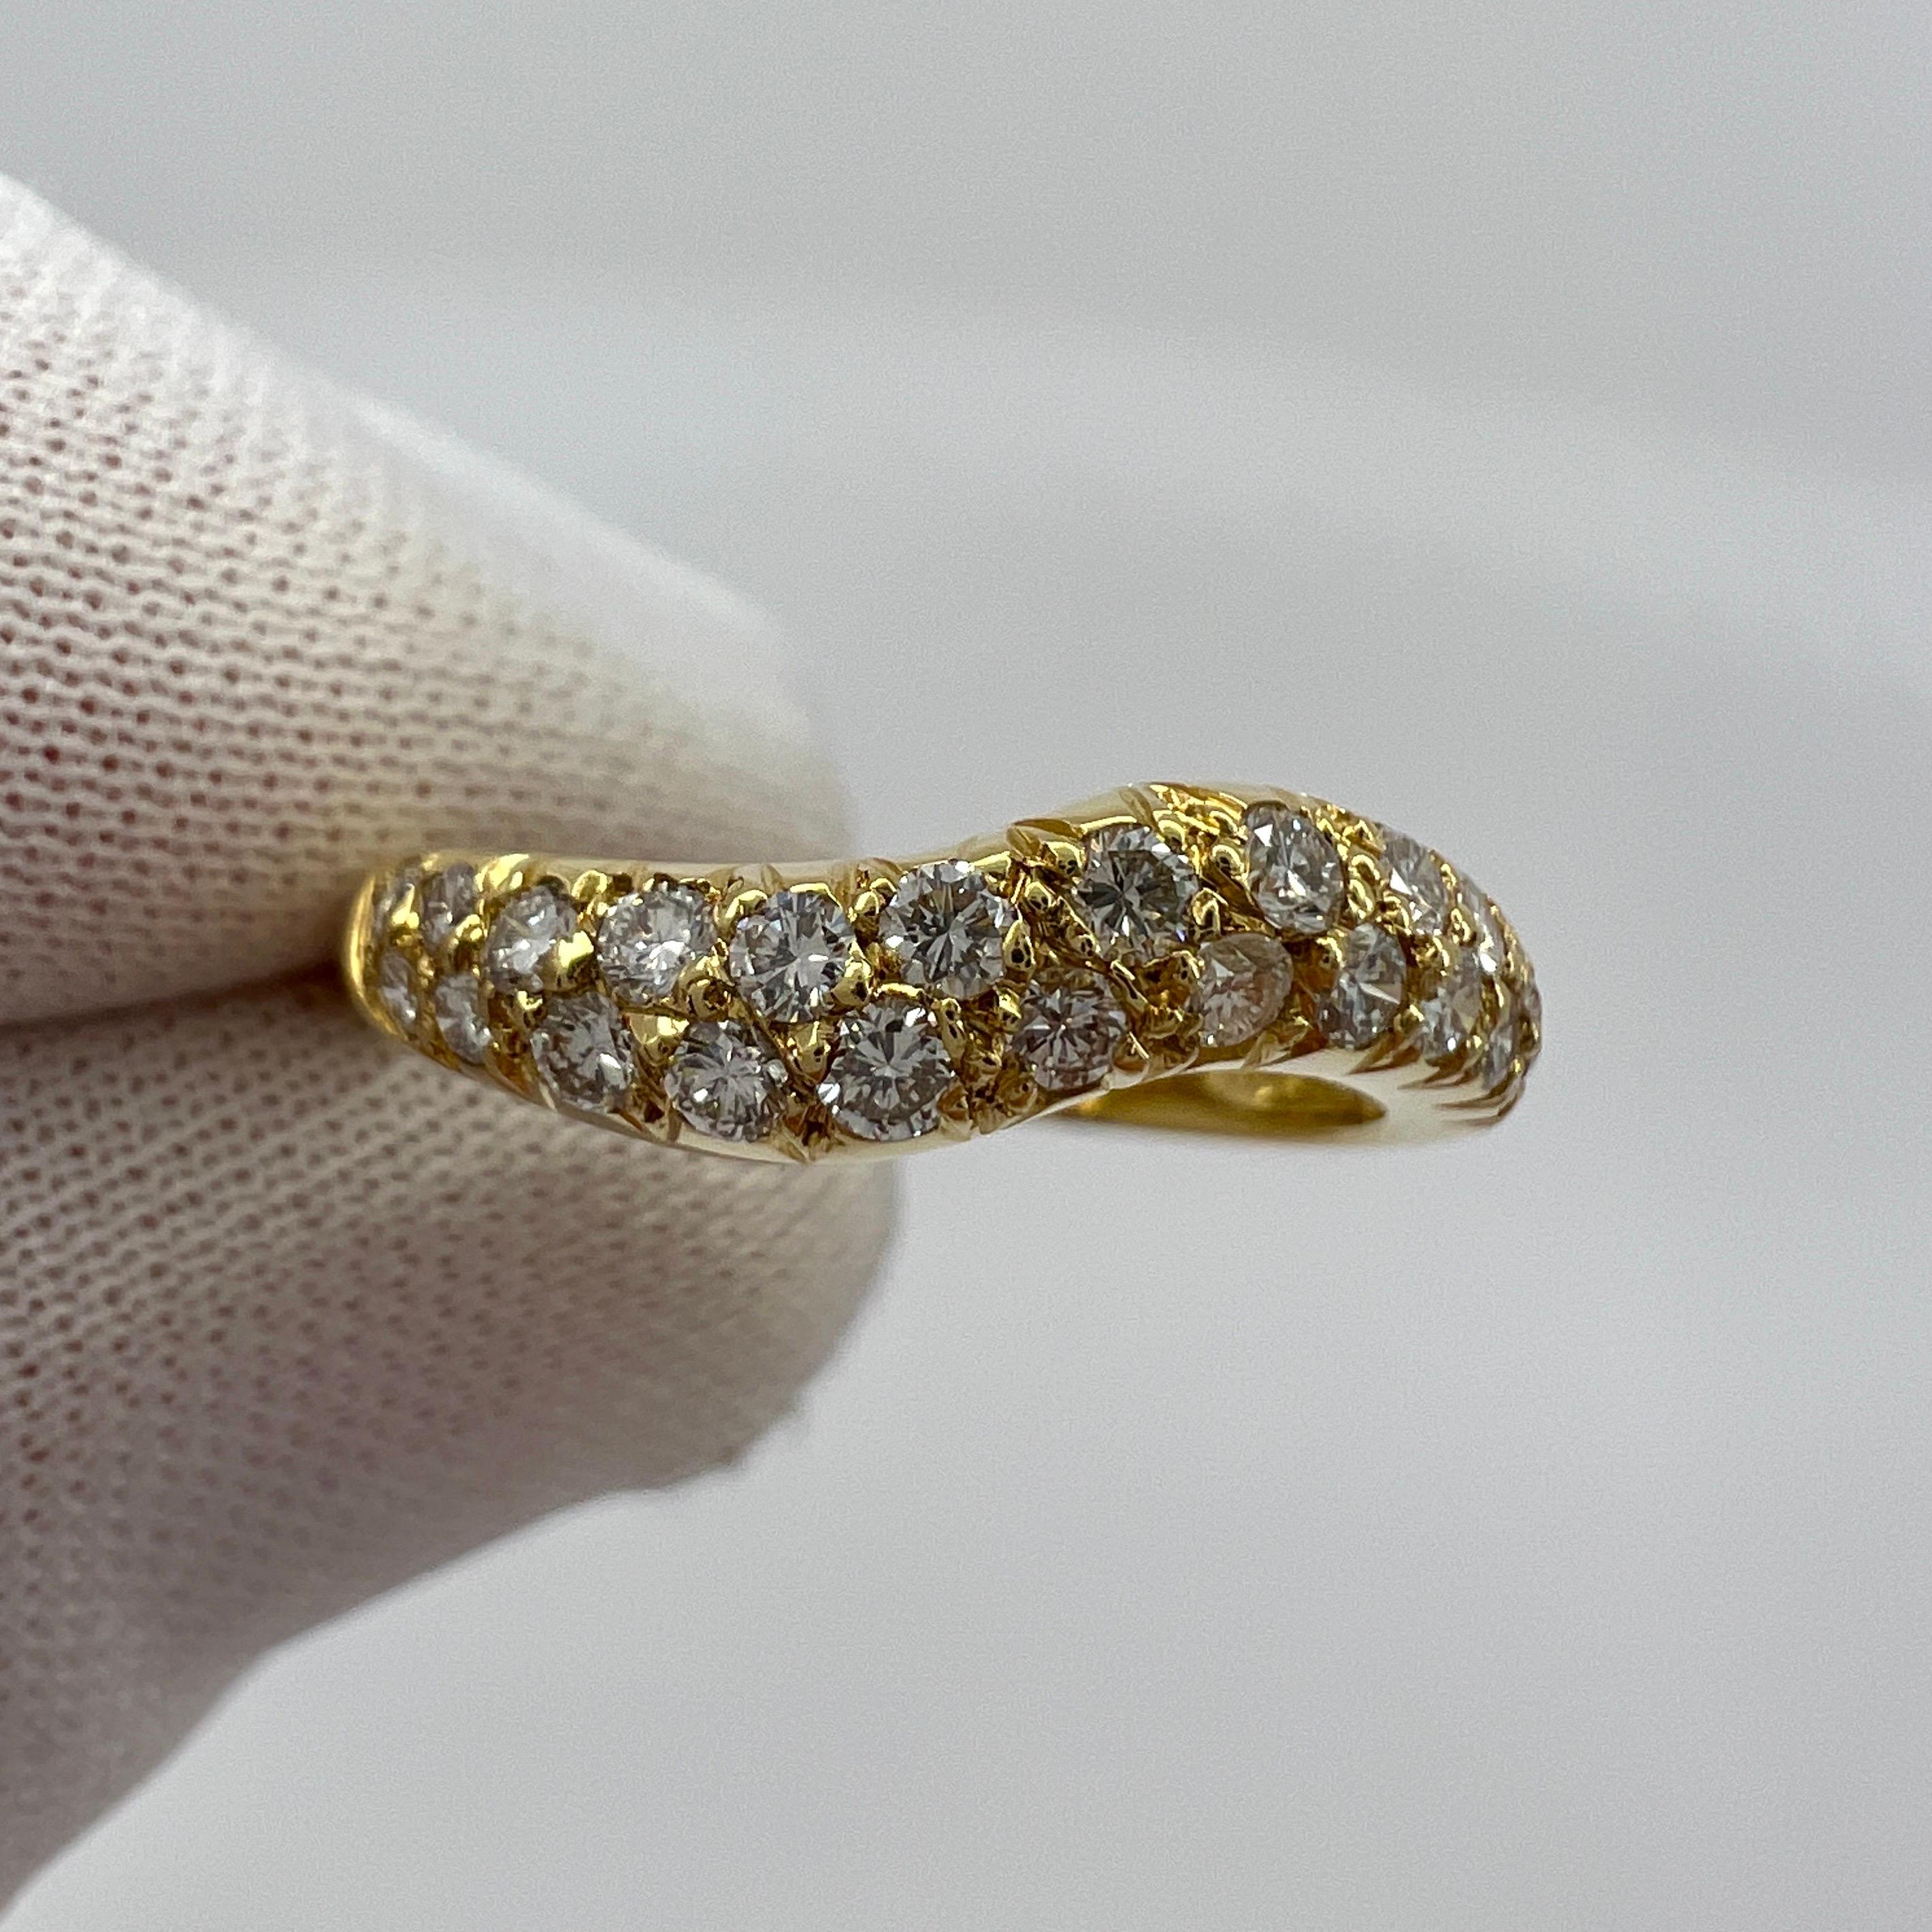 Rare Vintage Van Cleef & Arpels Pavé Diamond 18k Yellow Gold Wavey Band Ring

This beautifully made ring by VCA features a 'wavey' curved design with beautifully set Pavé diamonds going halfway around the band.

The diamonds are of excellent